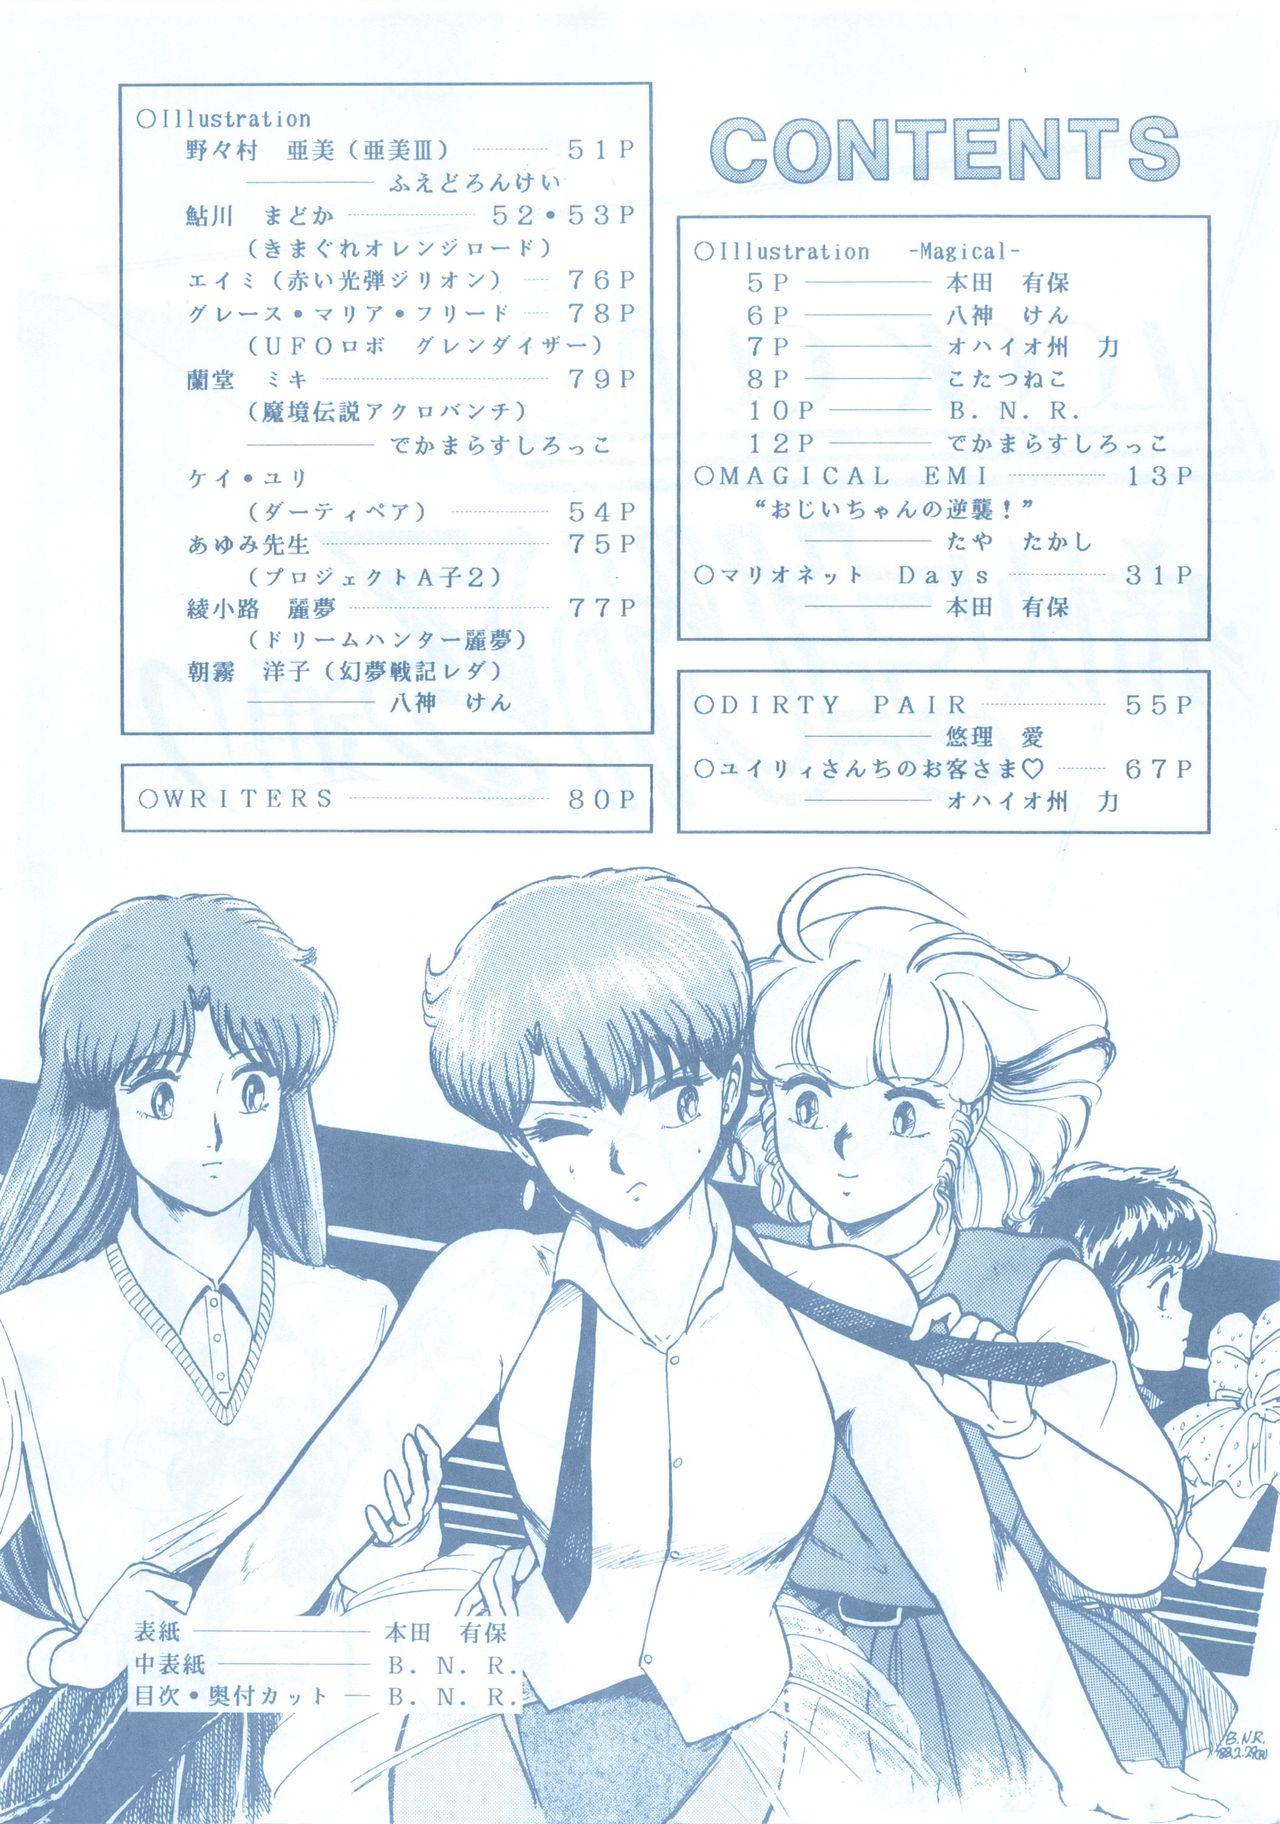 Oral Sex LOOK OUT 13 - Dirty pair Magical emi Zeta gundam Pigtails - Page 4